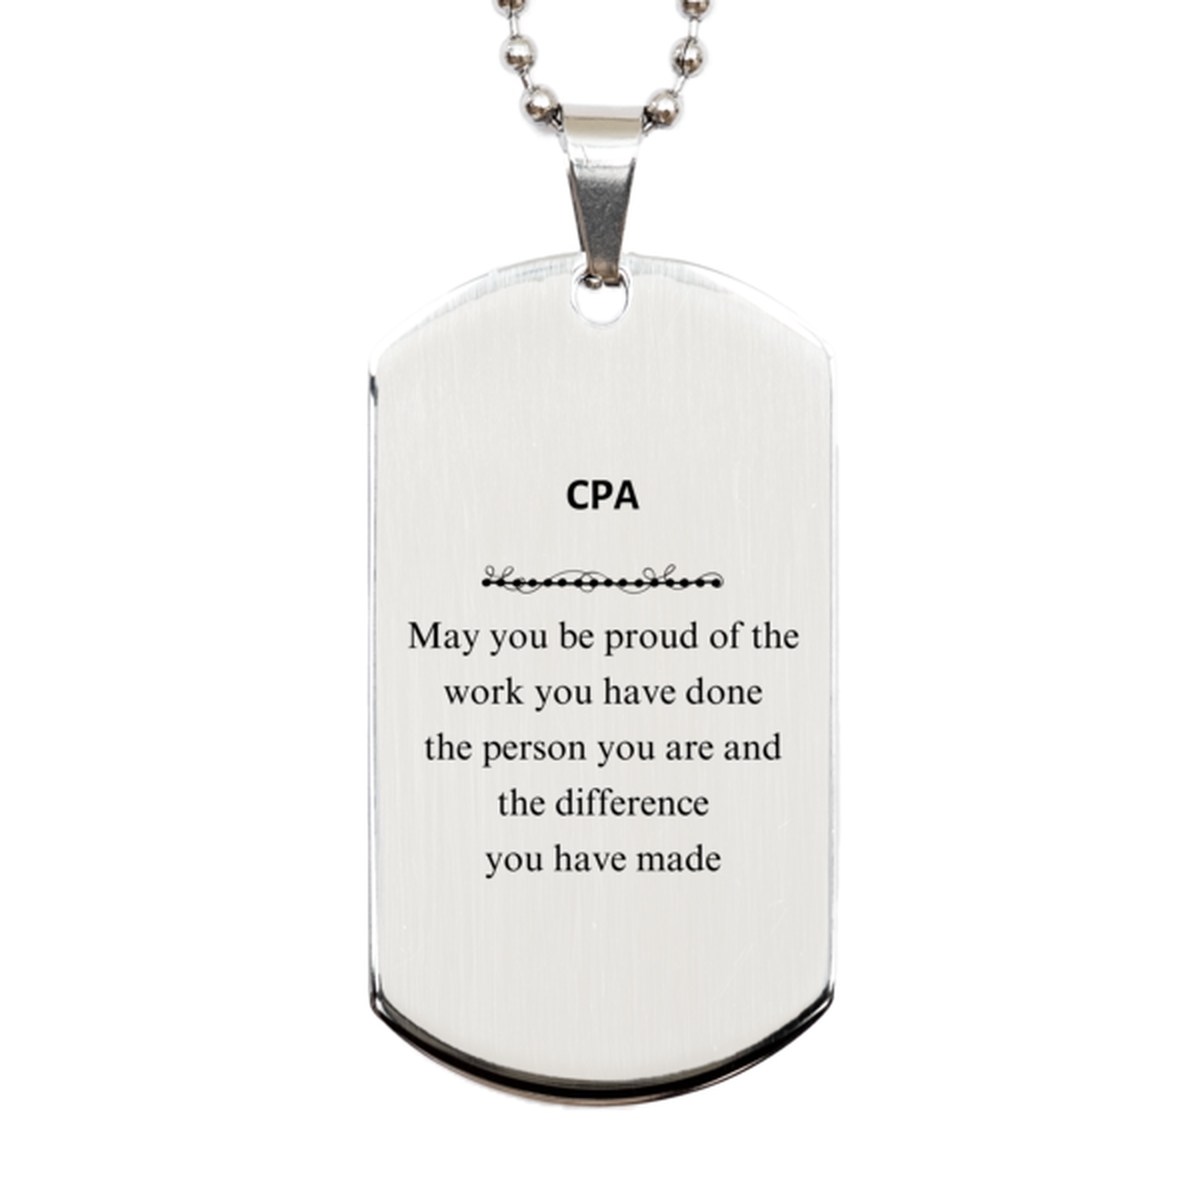 CPA May you be proud of the work you have done, Retirement CPA Silver Dog Tag for Colleague Appreciation Gifts Amazing for CPA